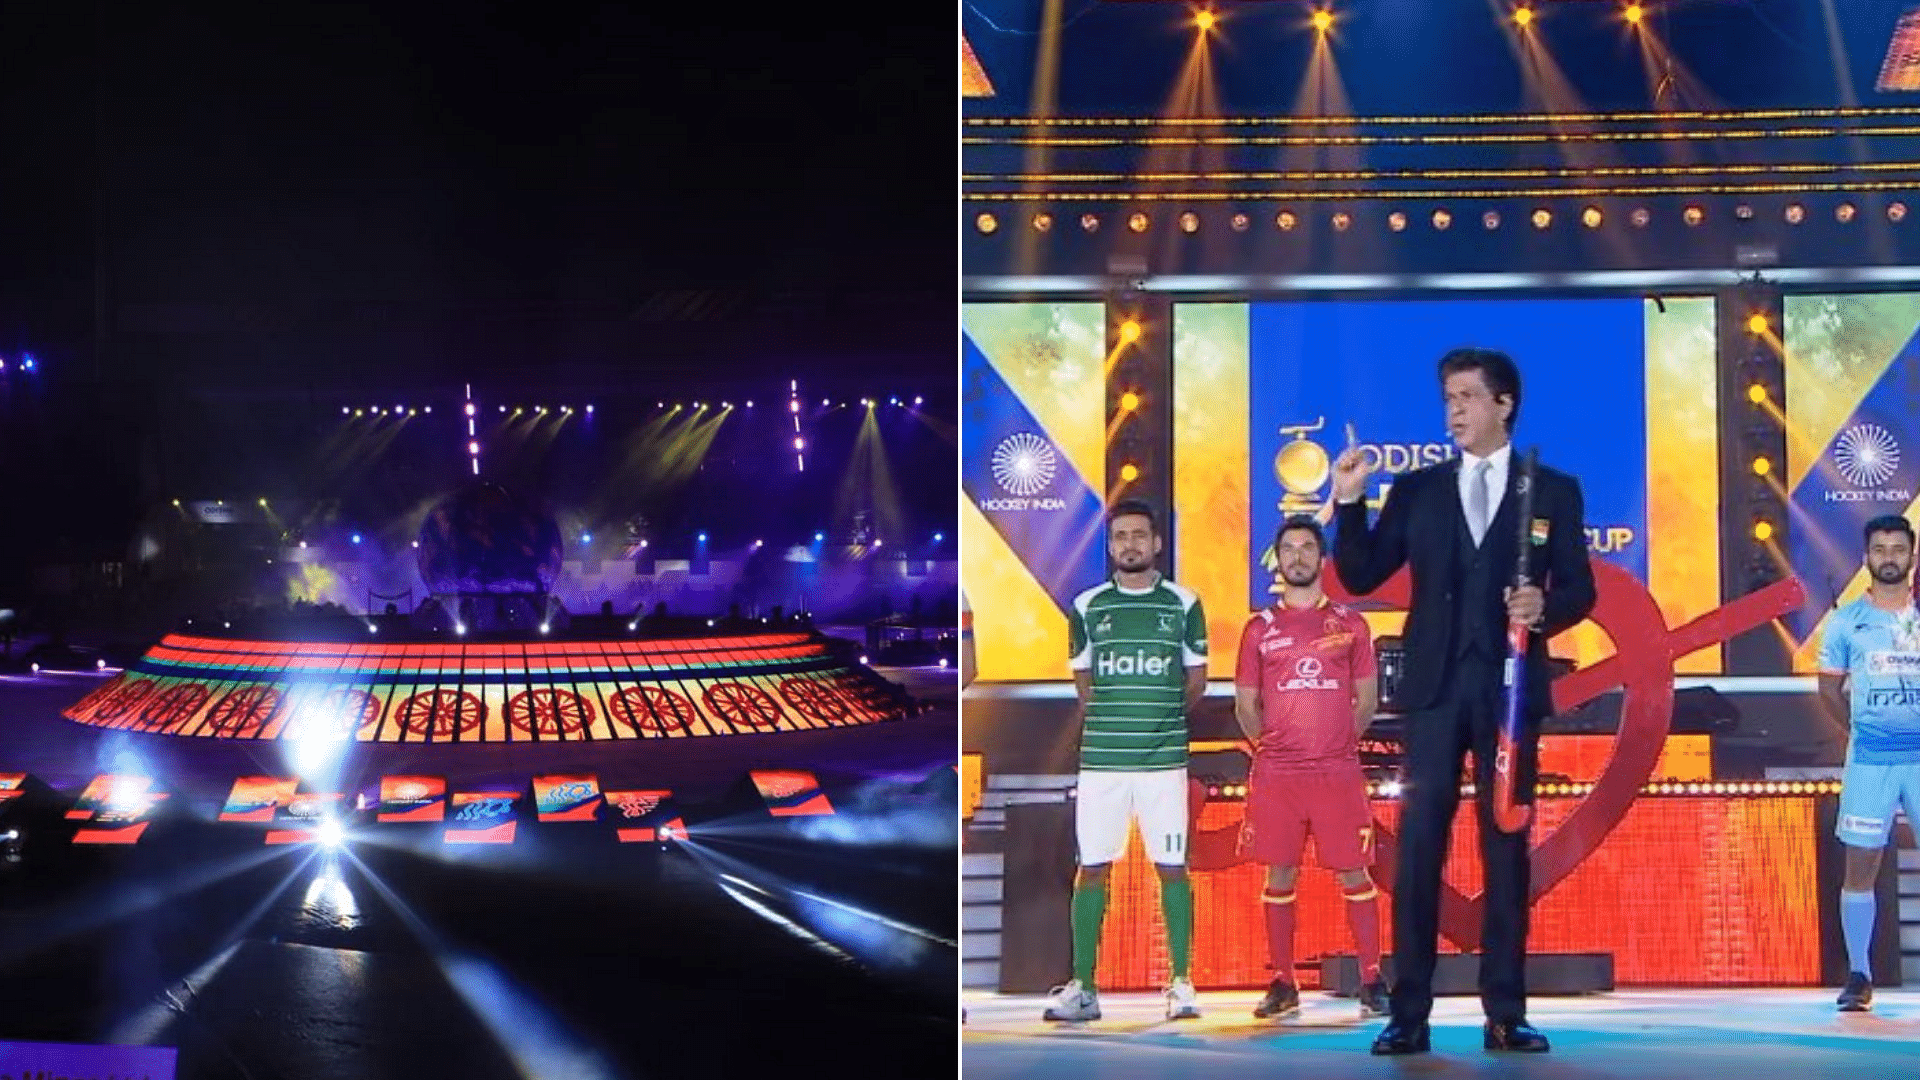 Shah Rukh Khan was among the headline acts of the 2018 FIH Men’s Hockey World Cup opening ceremony in Bhubaneswar.